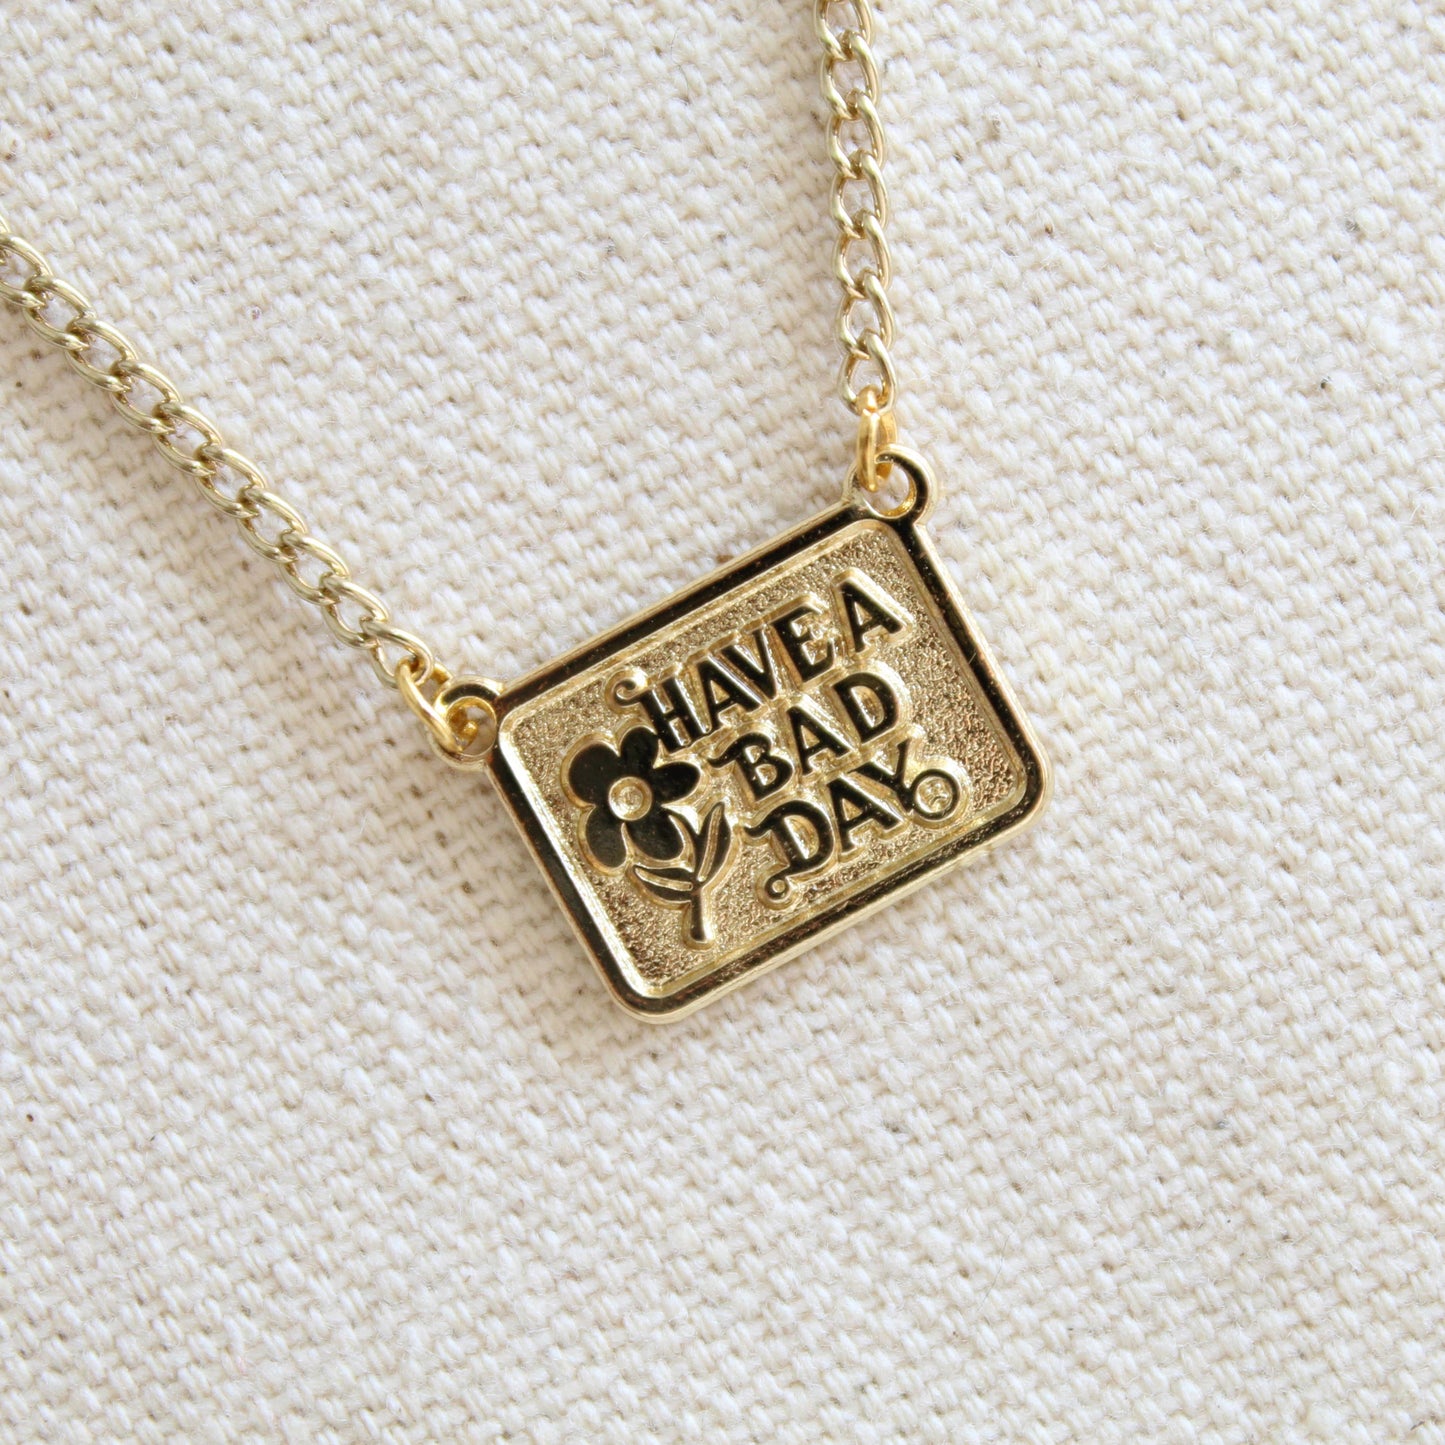 Have A Bad Day Mini Charm Necklace - Gold